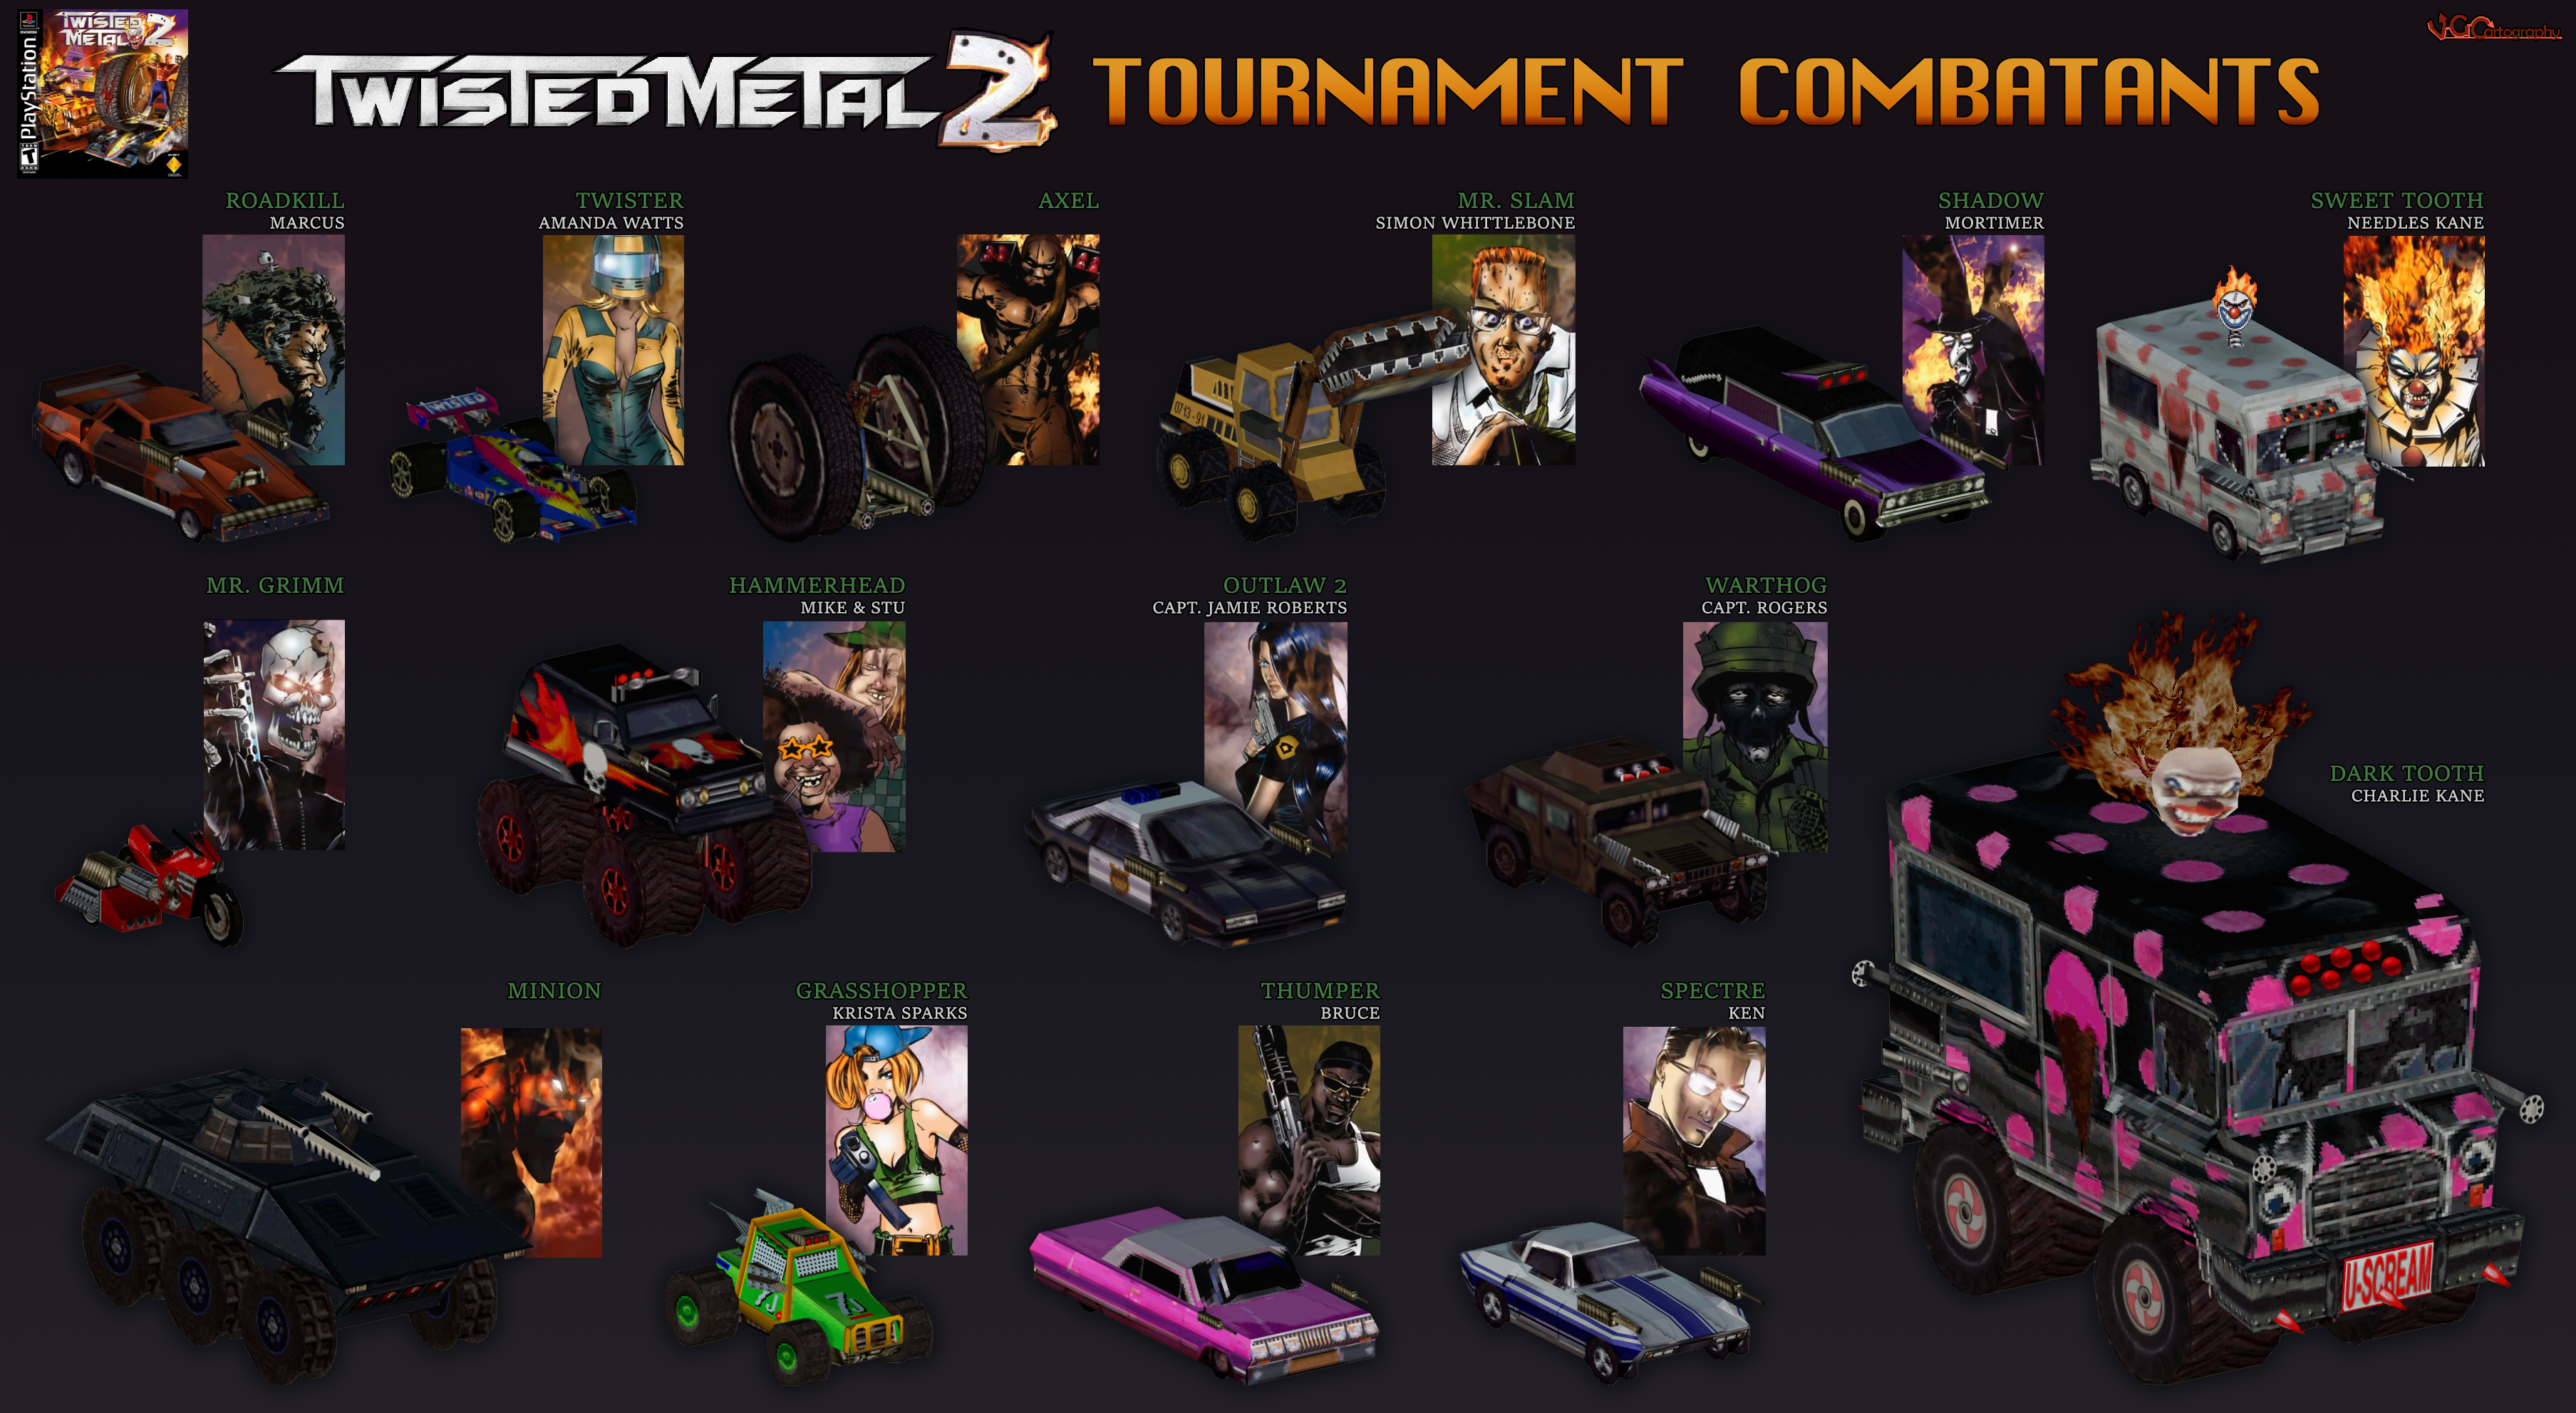 With Twisted Metal 1&2 getting added to the Game Category do you